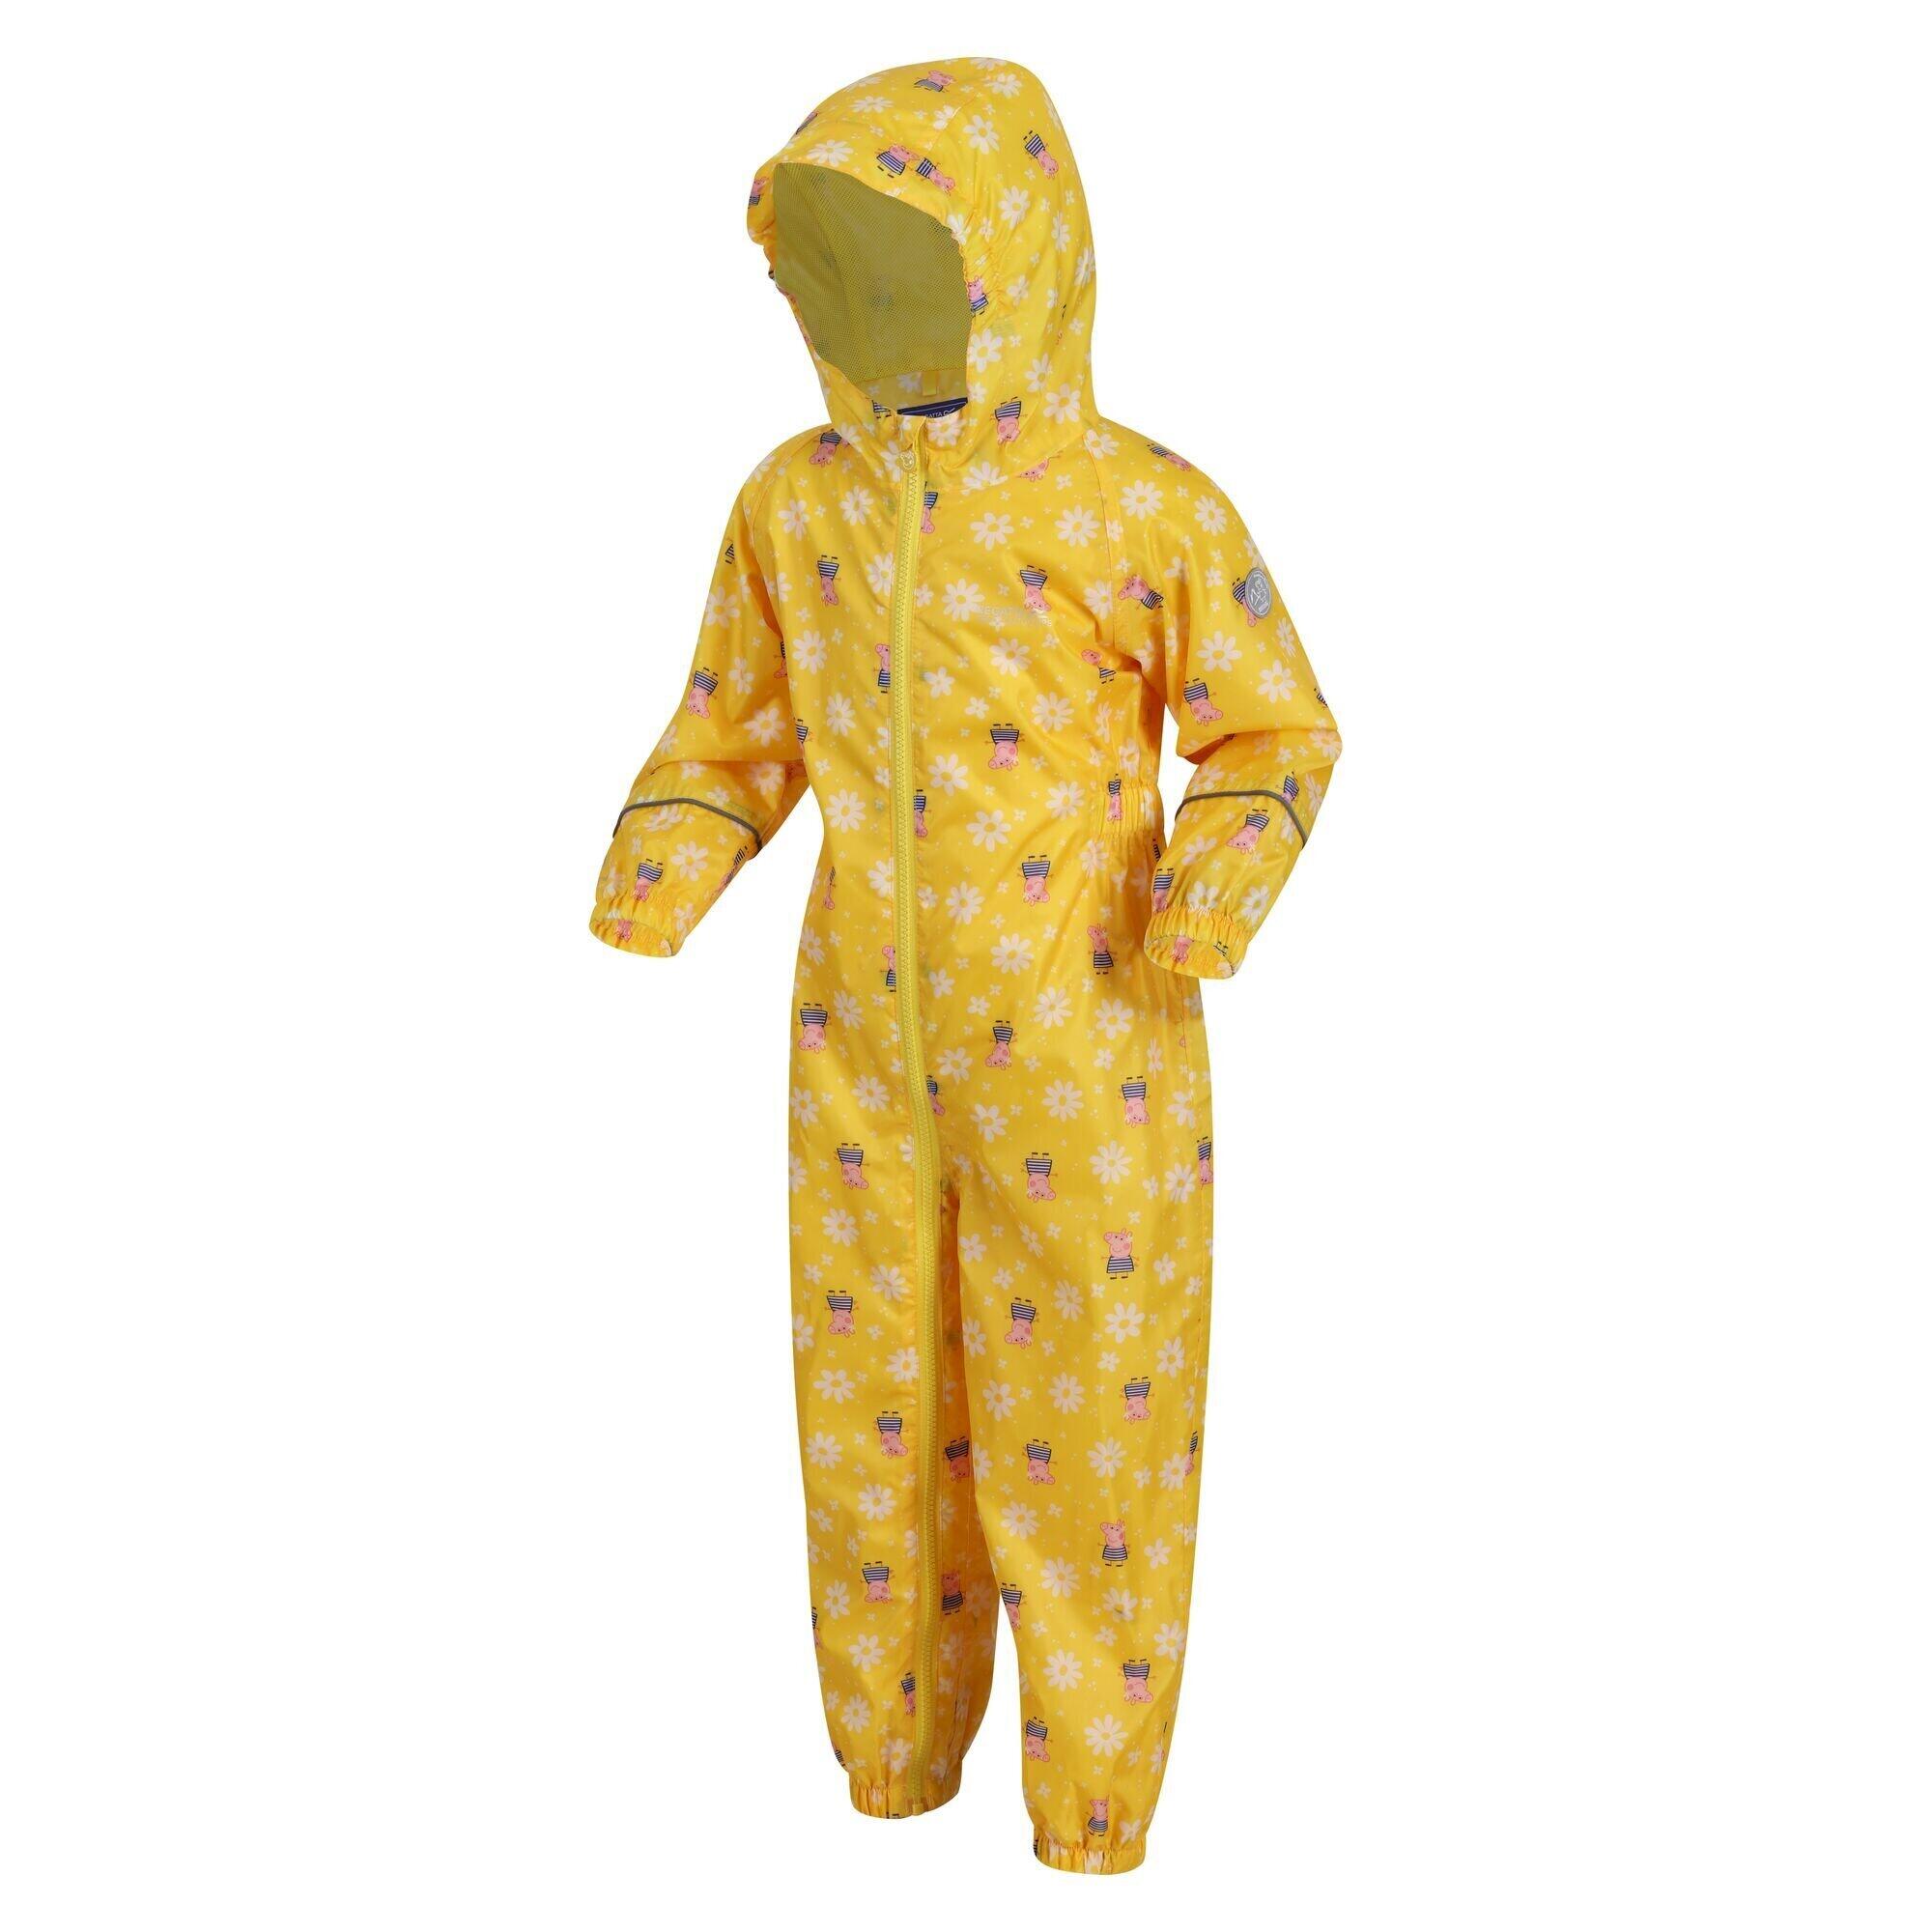 Childrens/Kids Pobble Peppa Pig Floral Waterproof Puddle Suit (Maize Yellow) 4/5